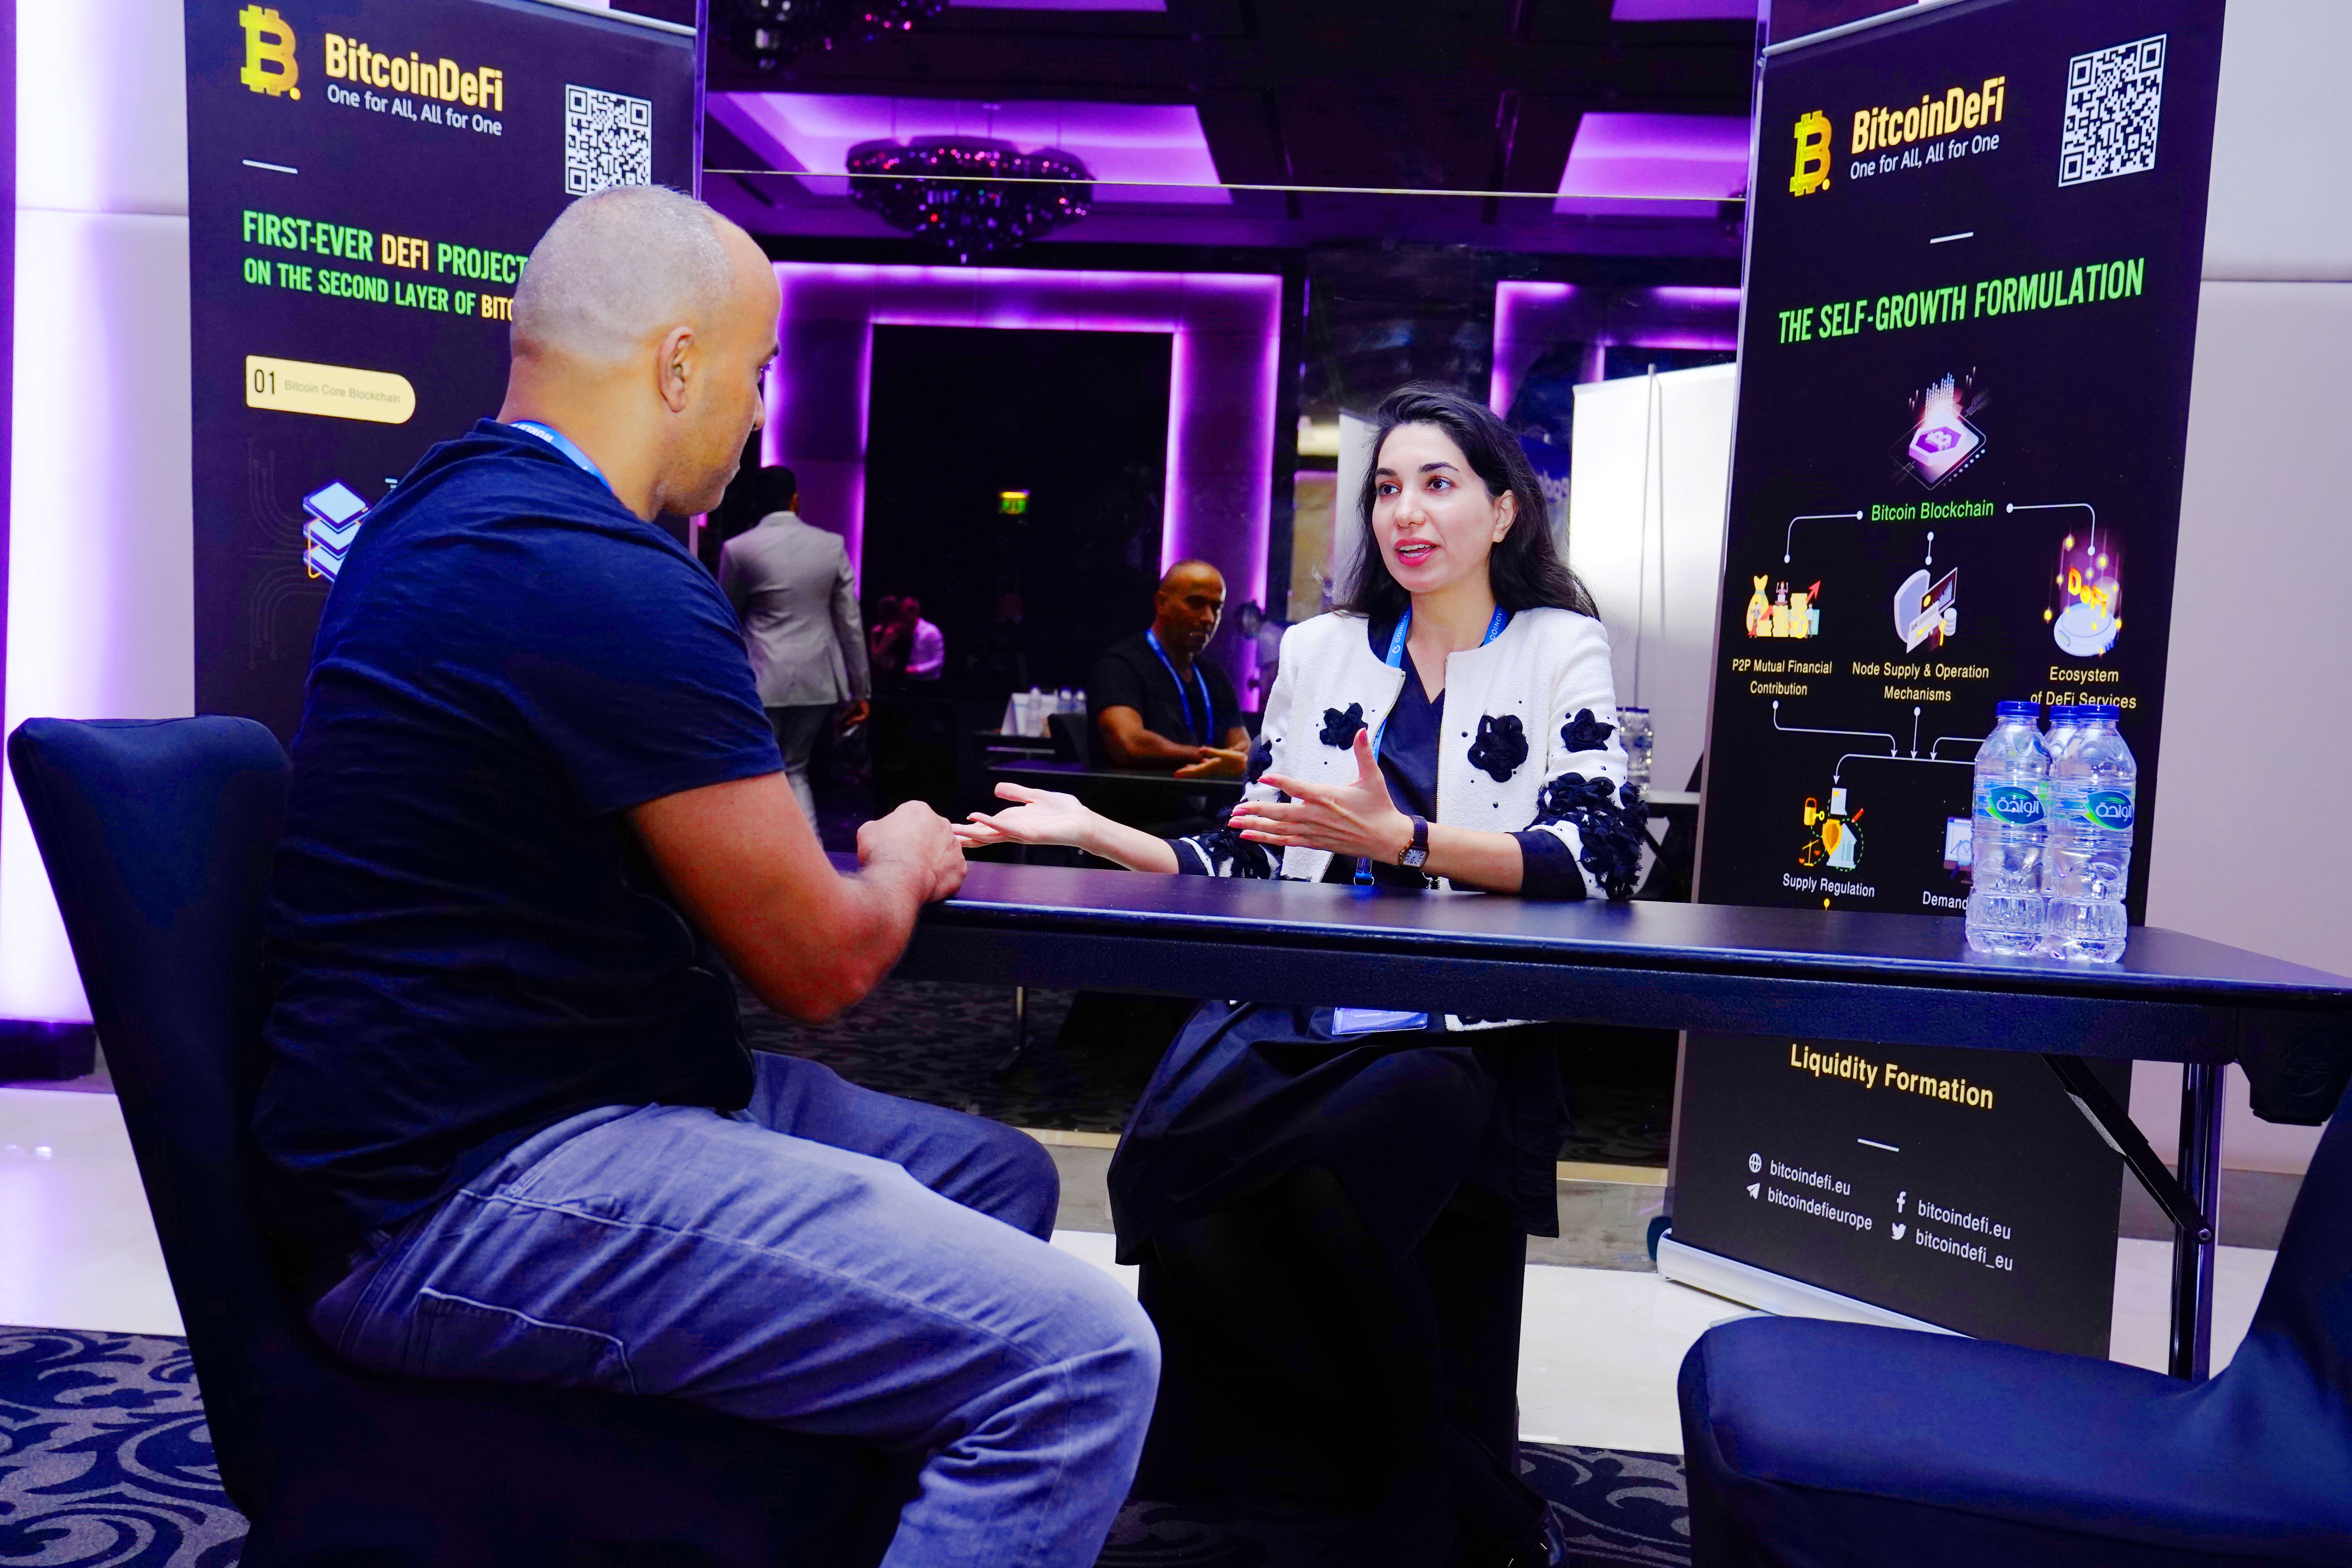 BitcoinDeFi gave out advices to guest at the 19th World Blockchain Summit (Image: Tresconglobal)